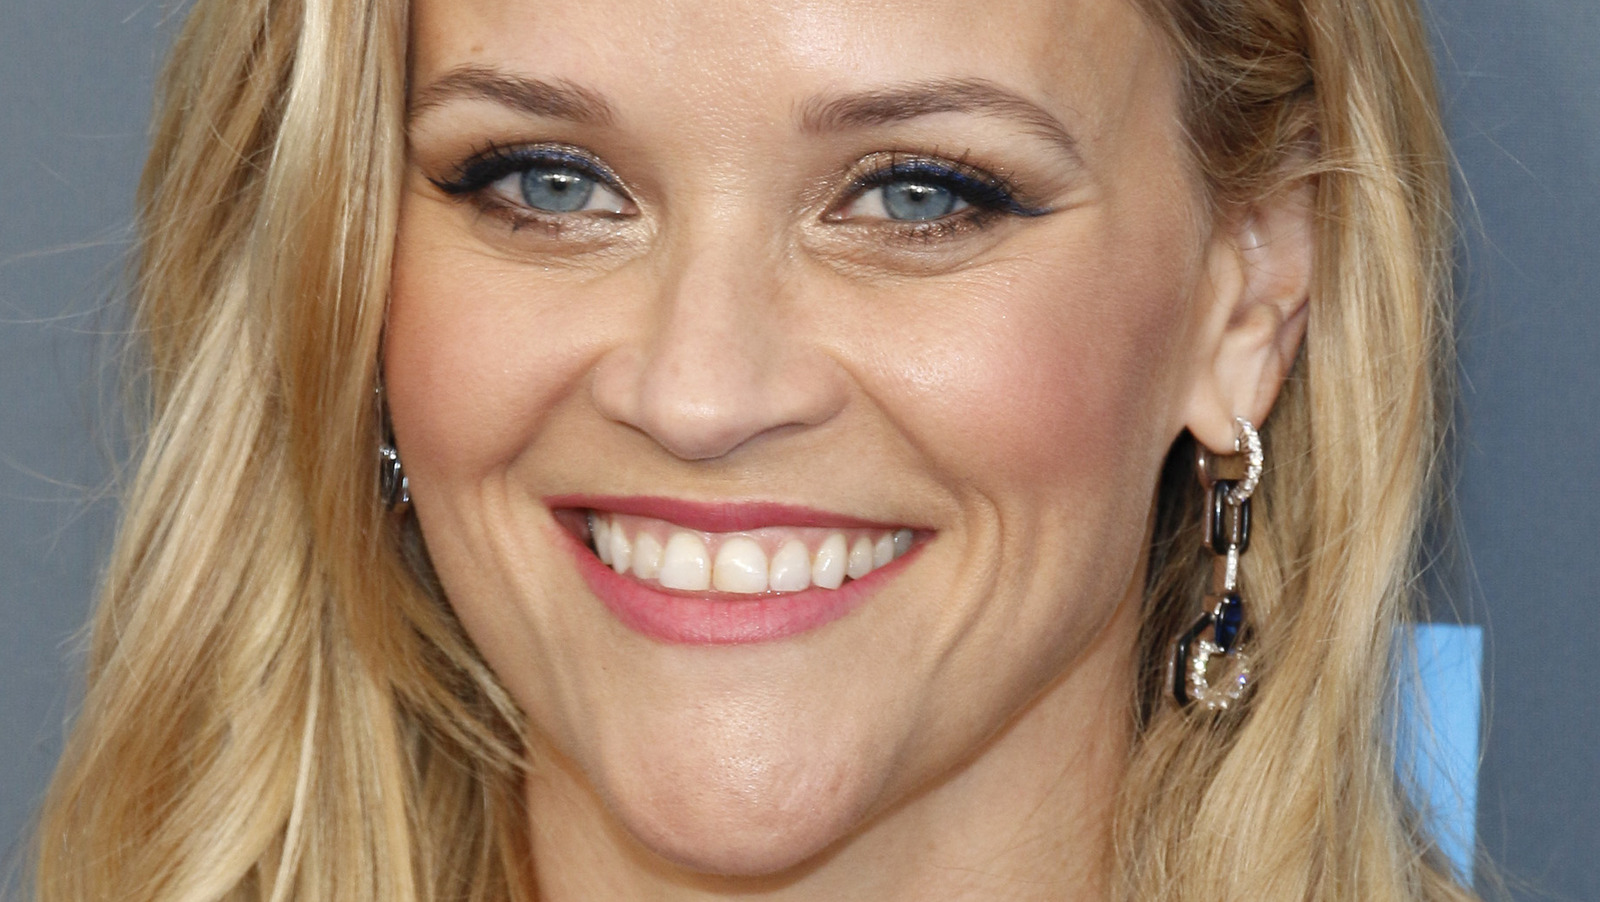 The Sweet Reason Reese Witherspoon Reunited With Ex Husband Ryan Phillippe